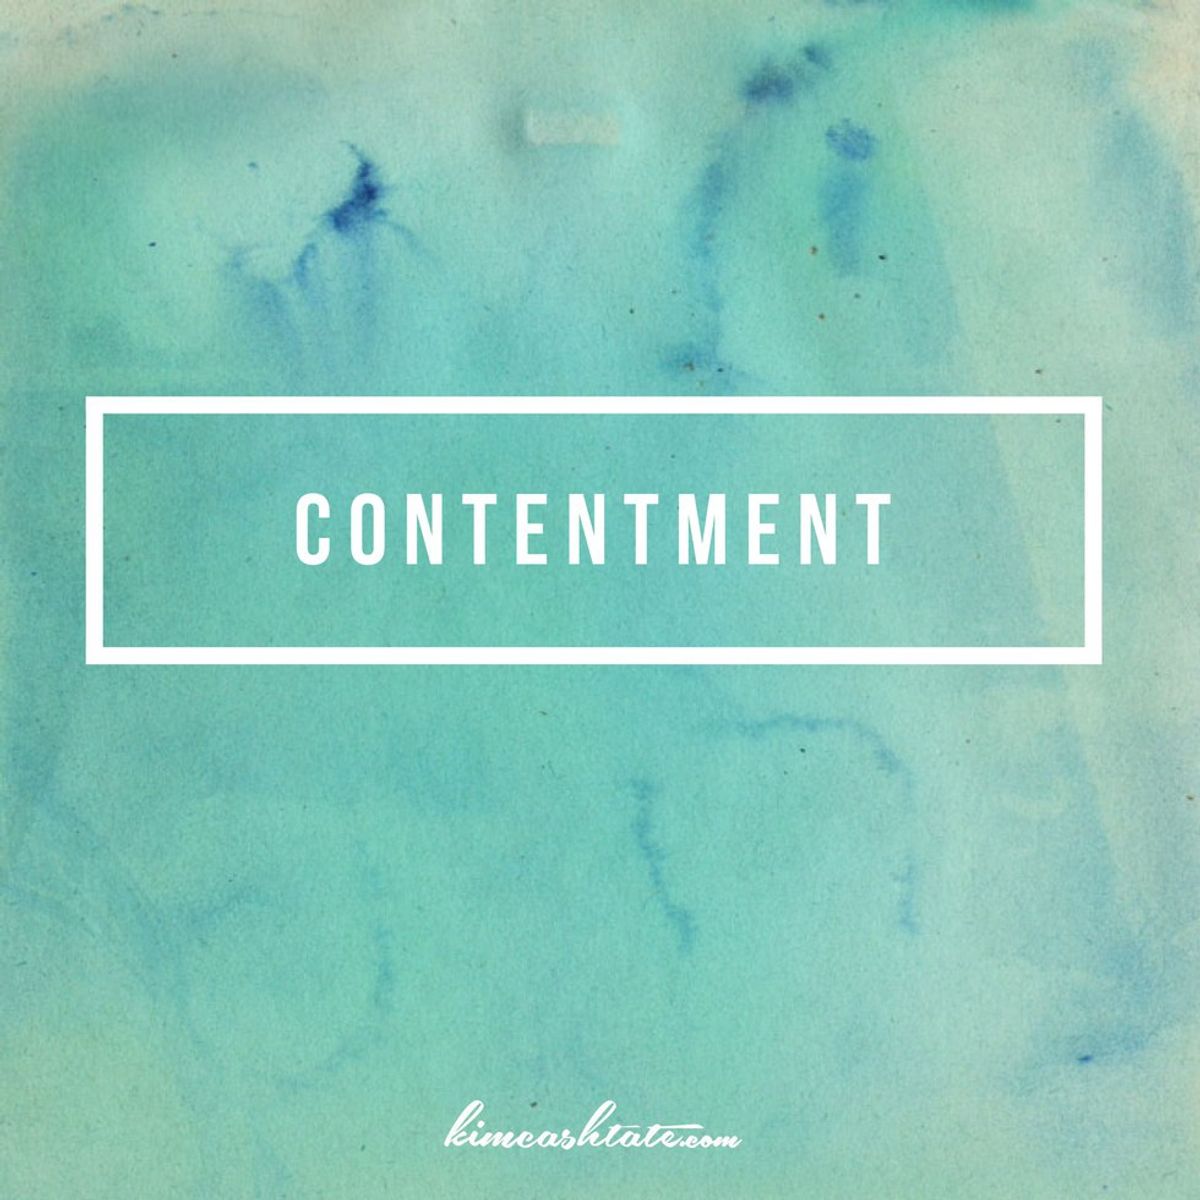 Where is your contentment?